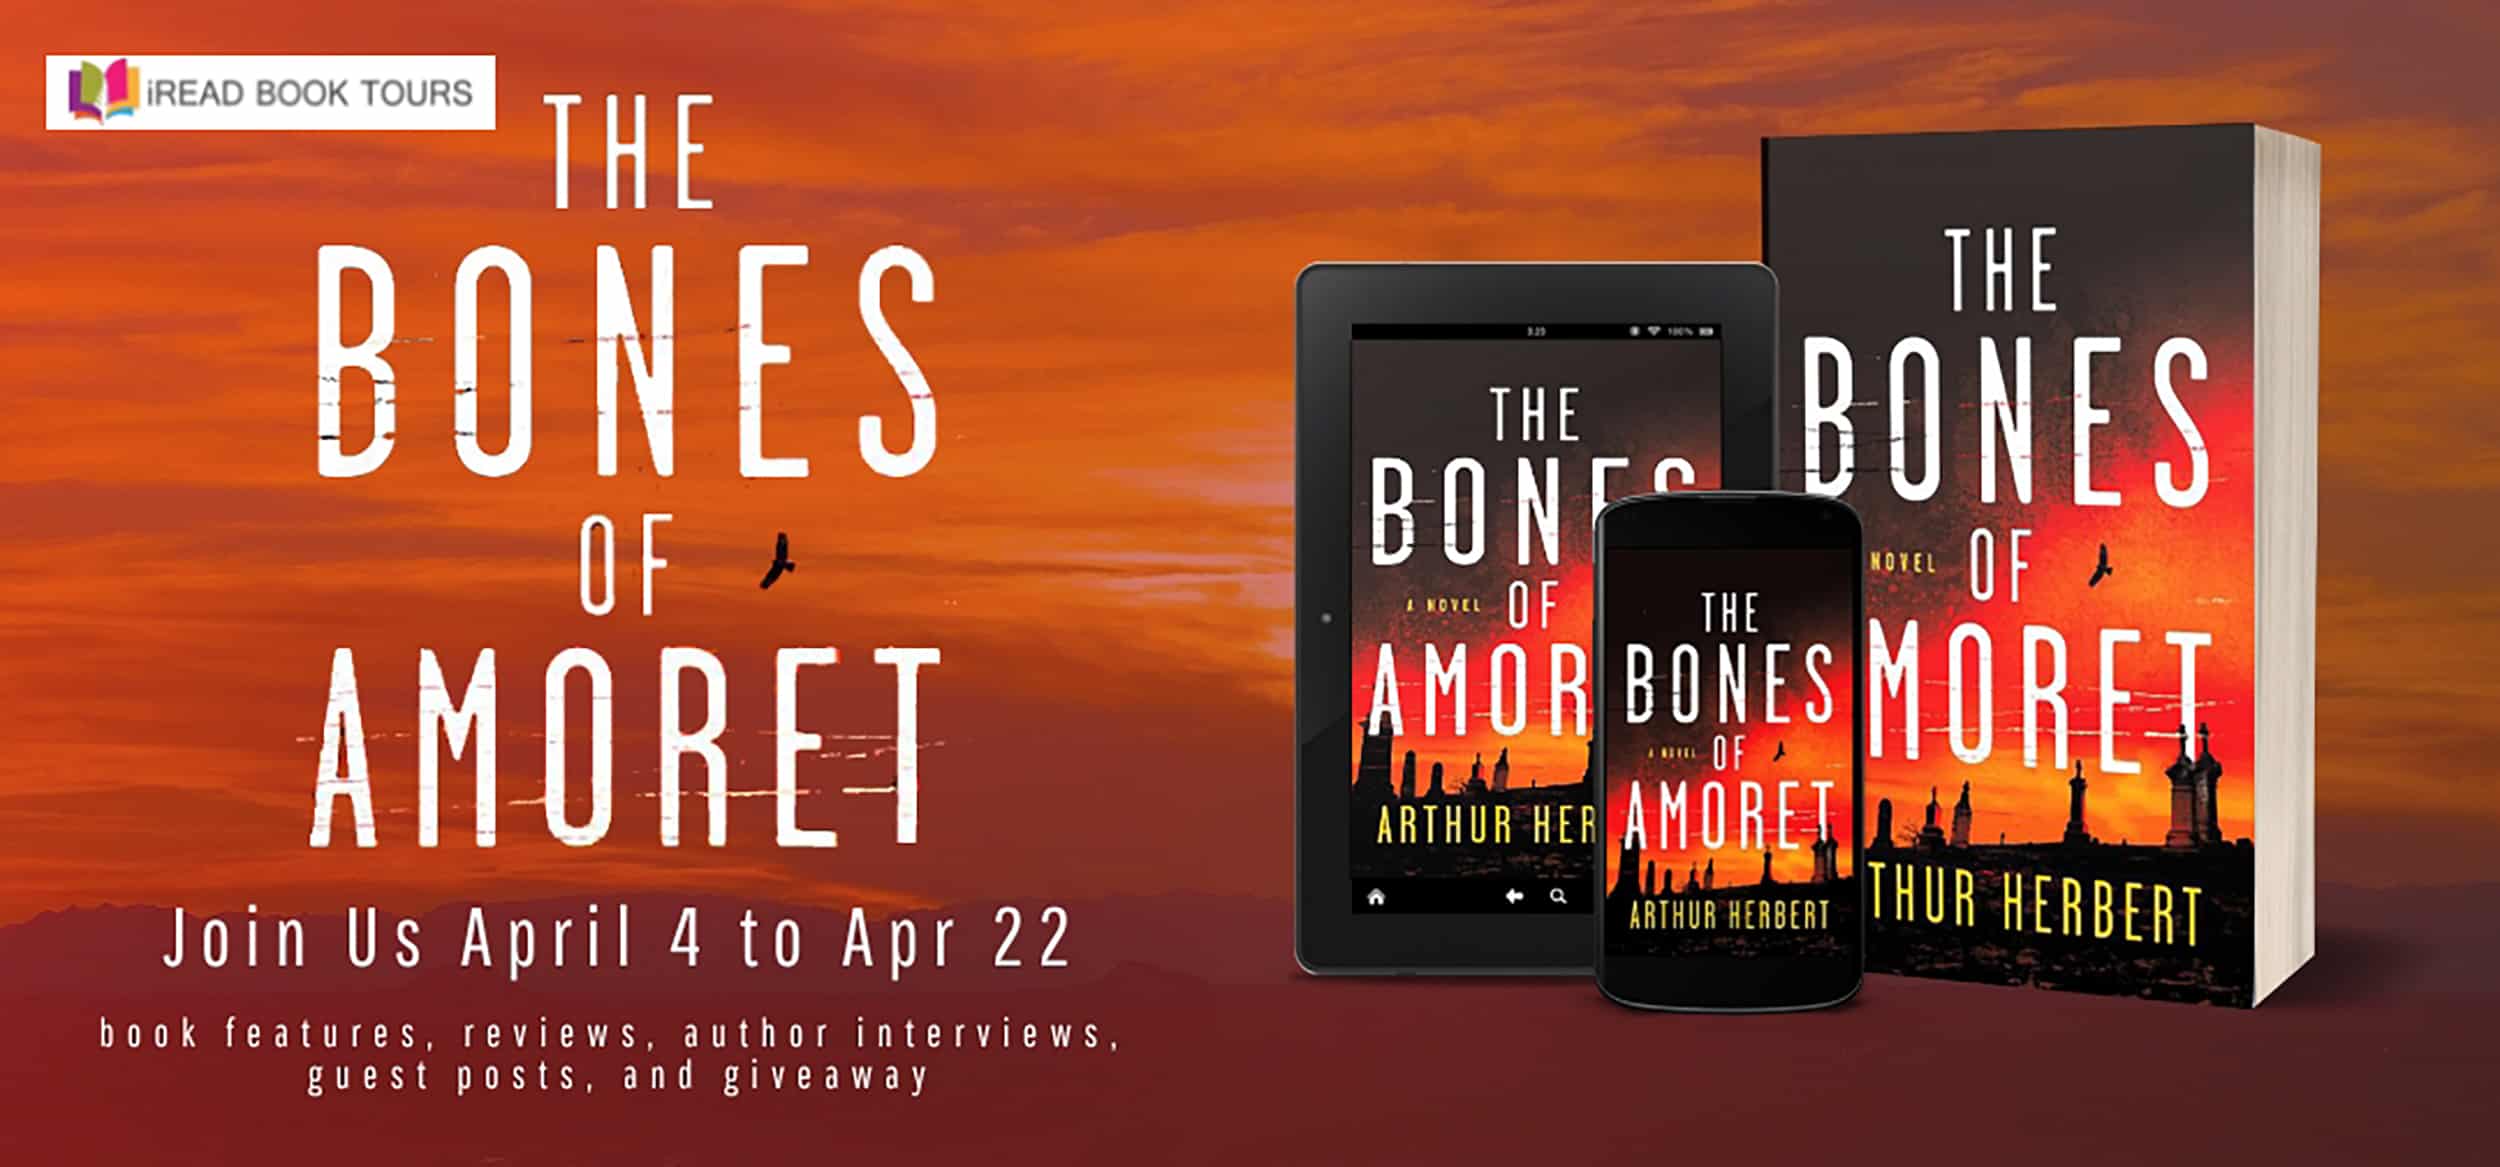 The Bones of Amoret by Arthur Herbert | Giveaway (3 Winners) - Book Details, Guest Post, & Author Profile